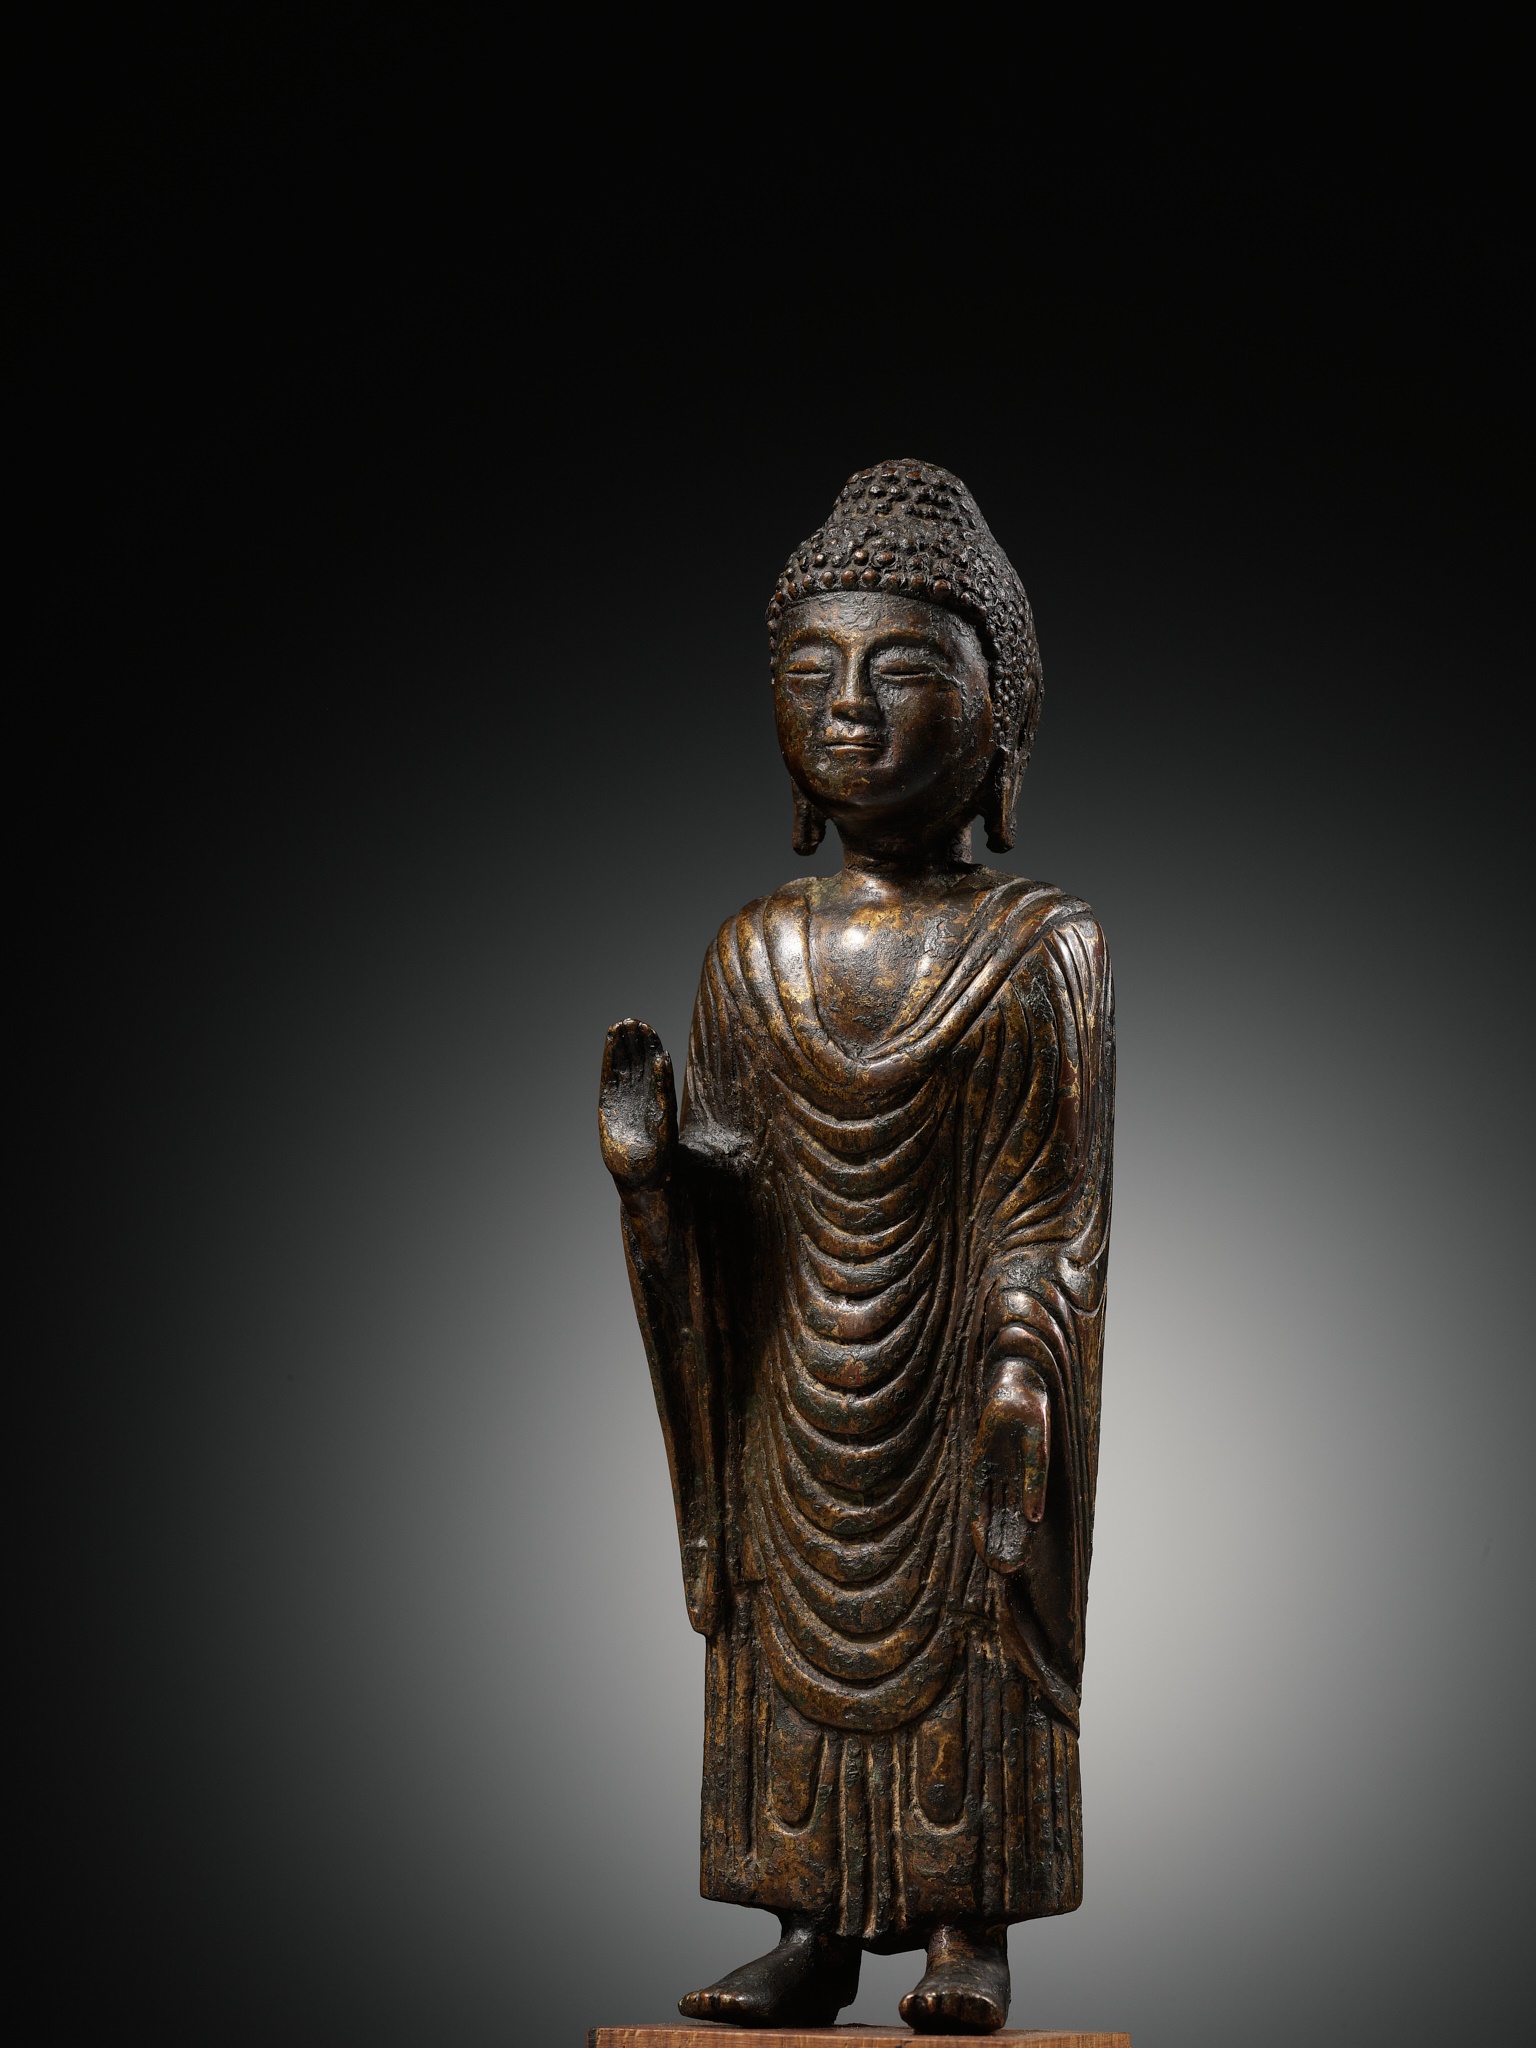 A GILT-BRONZE STANDING FIGURE OF BUDDHA, UNIFIED SILLA DYNASTY, KOREA, 8TH - 9TH CENTURY - Image 6 of 12